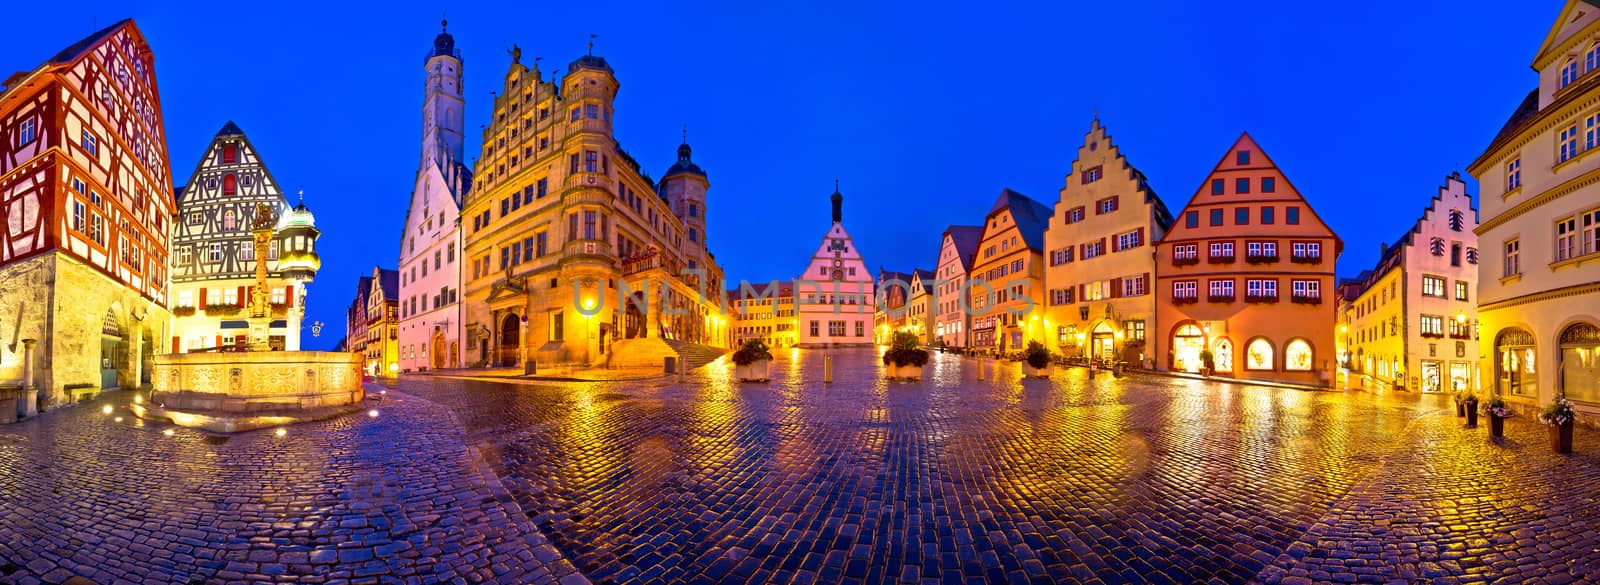 Main square (Marktplatz or Market square) of medieval German tow by xbrchx